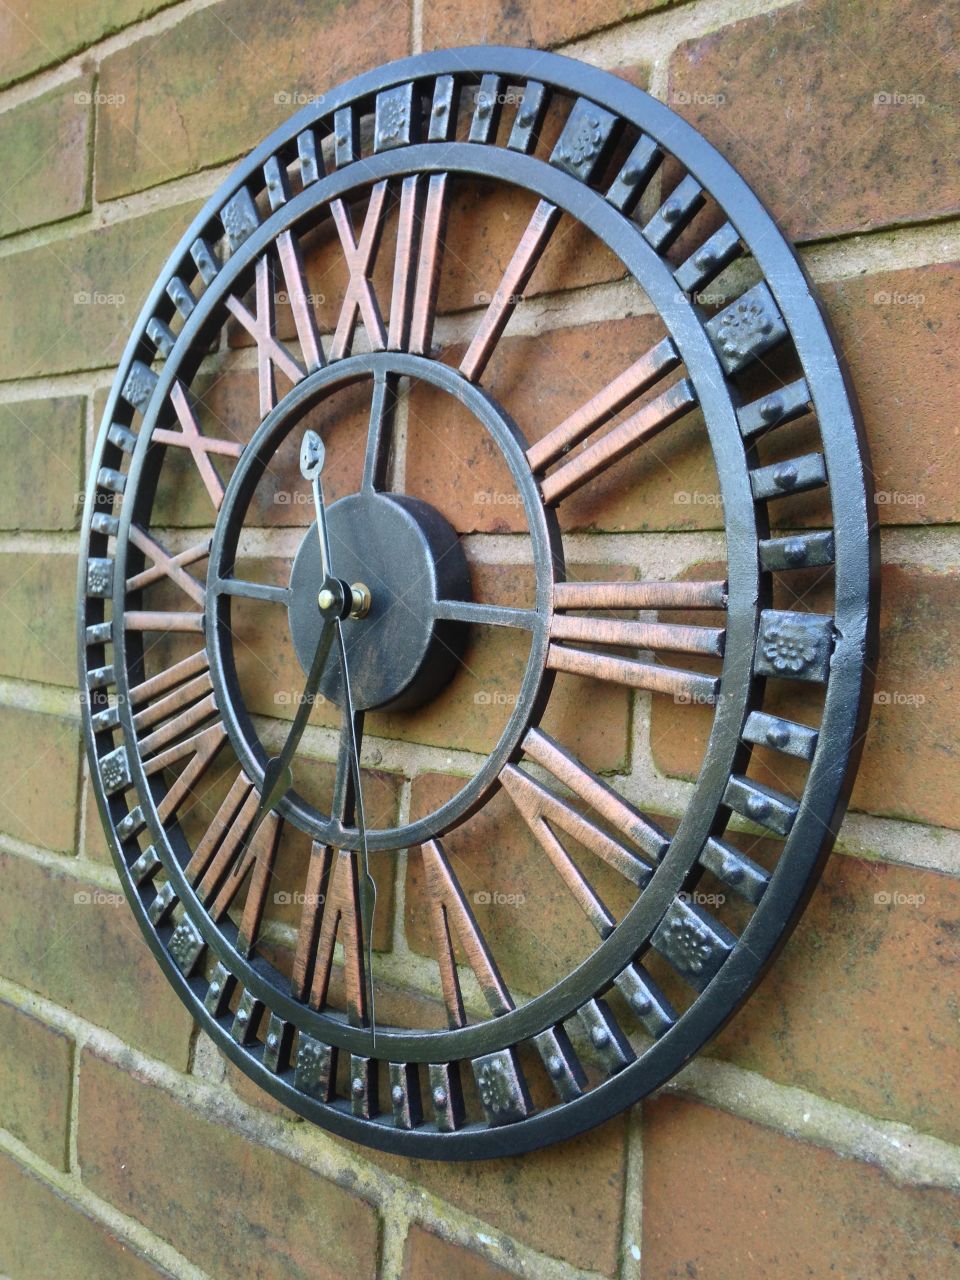 Rustic metallic clock.  Time on your hands.